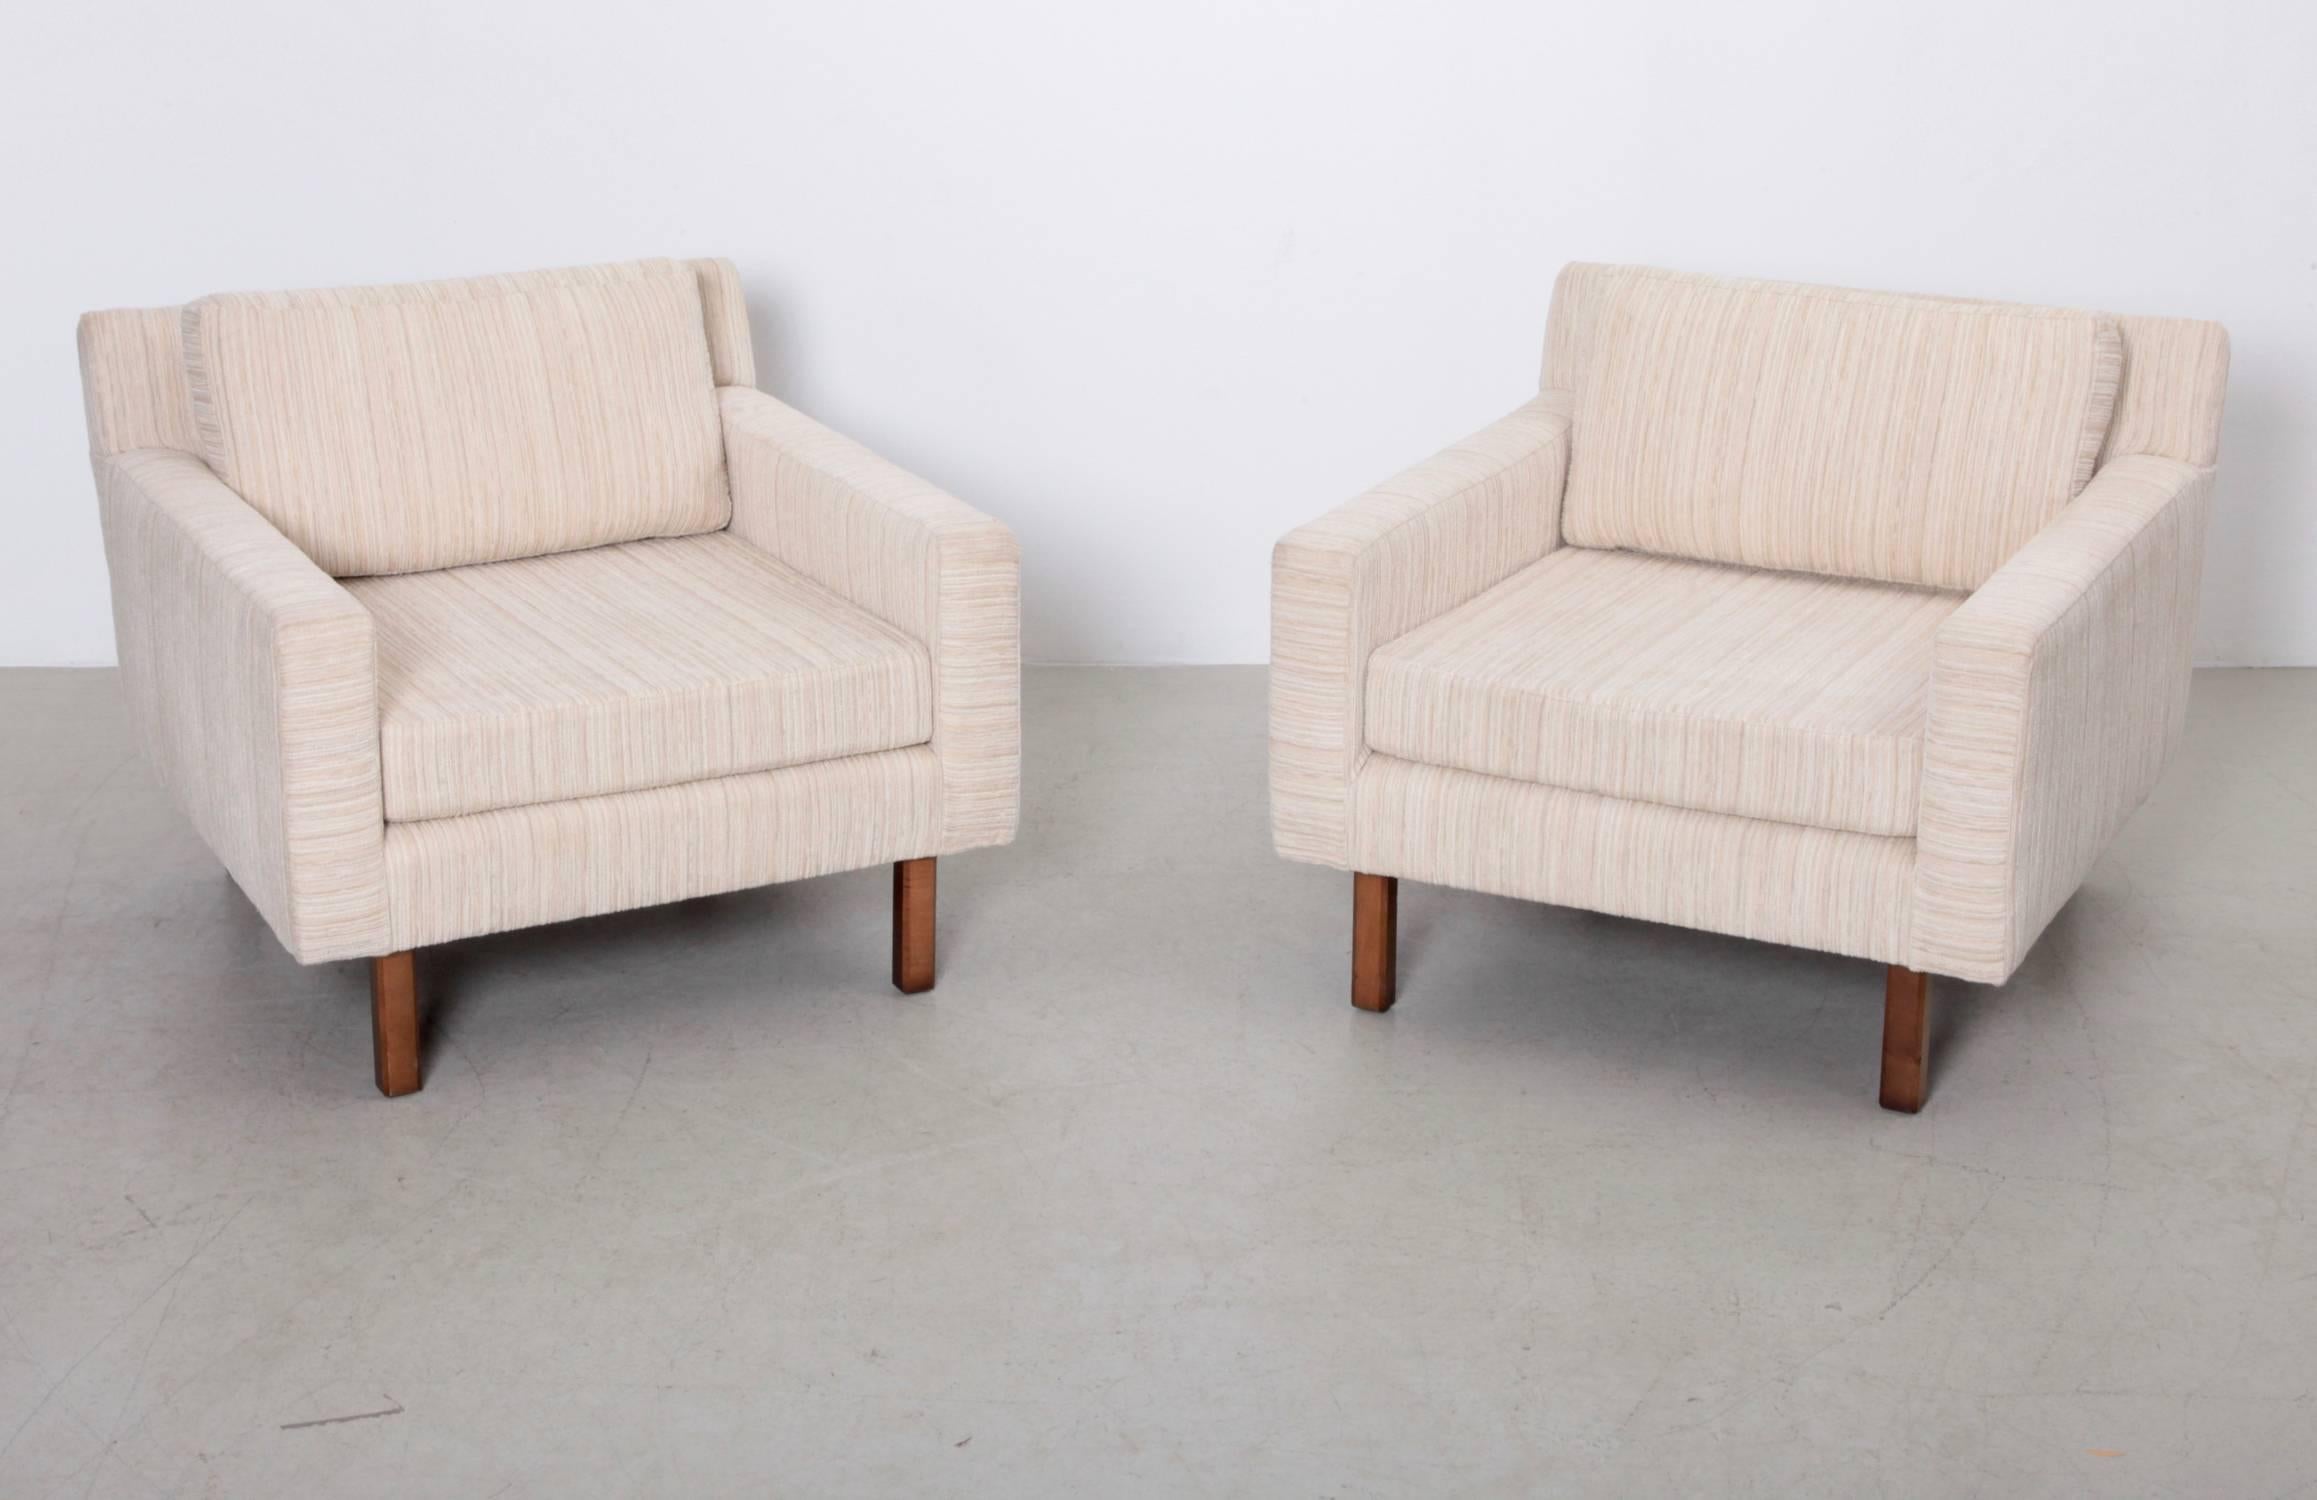 Pair of Milo Baughman lounge chairs in a cream fabric and solid wood feet.
Good vintage condition.

